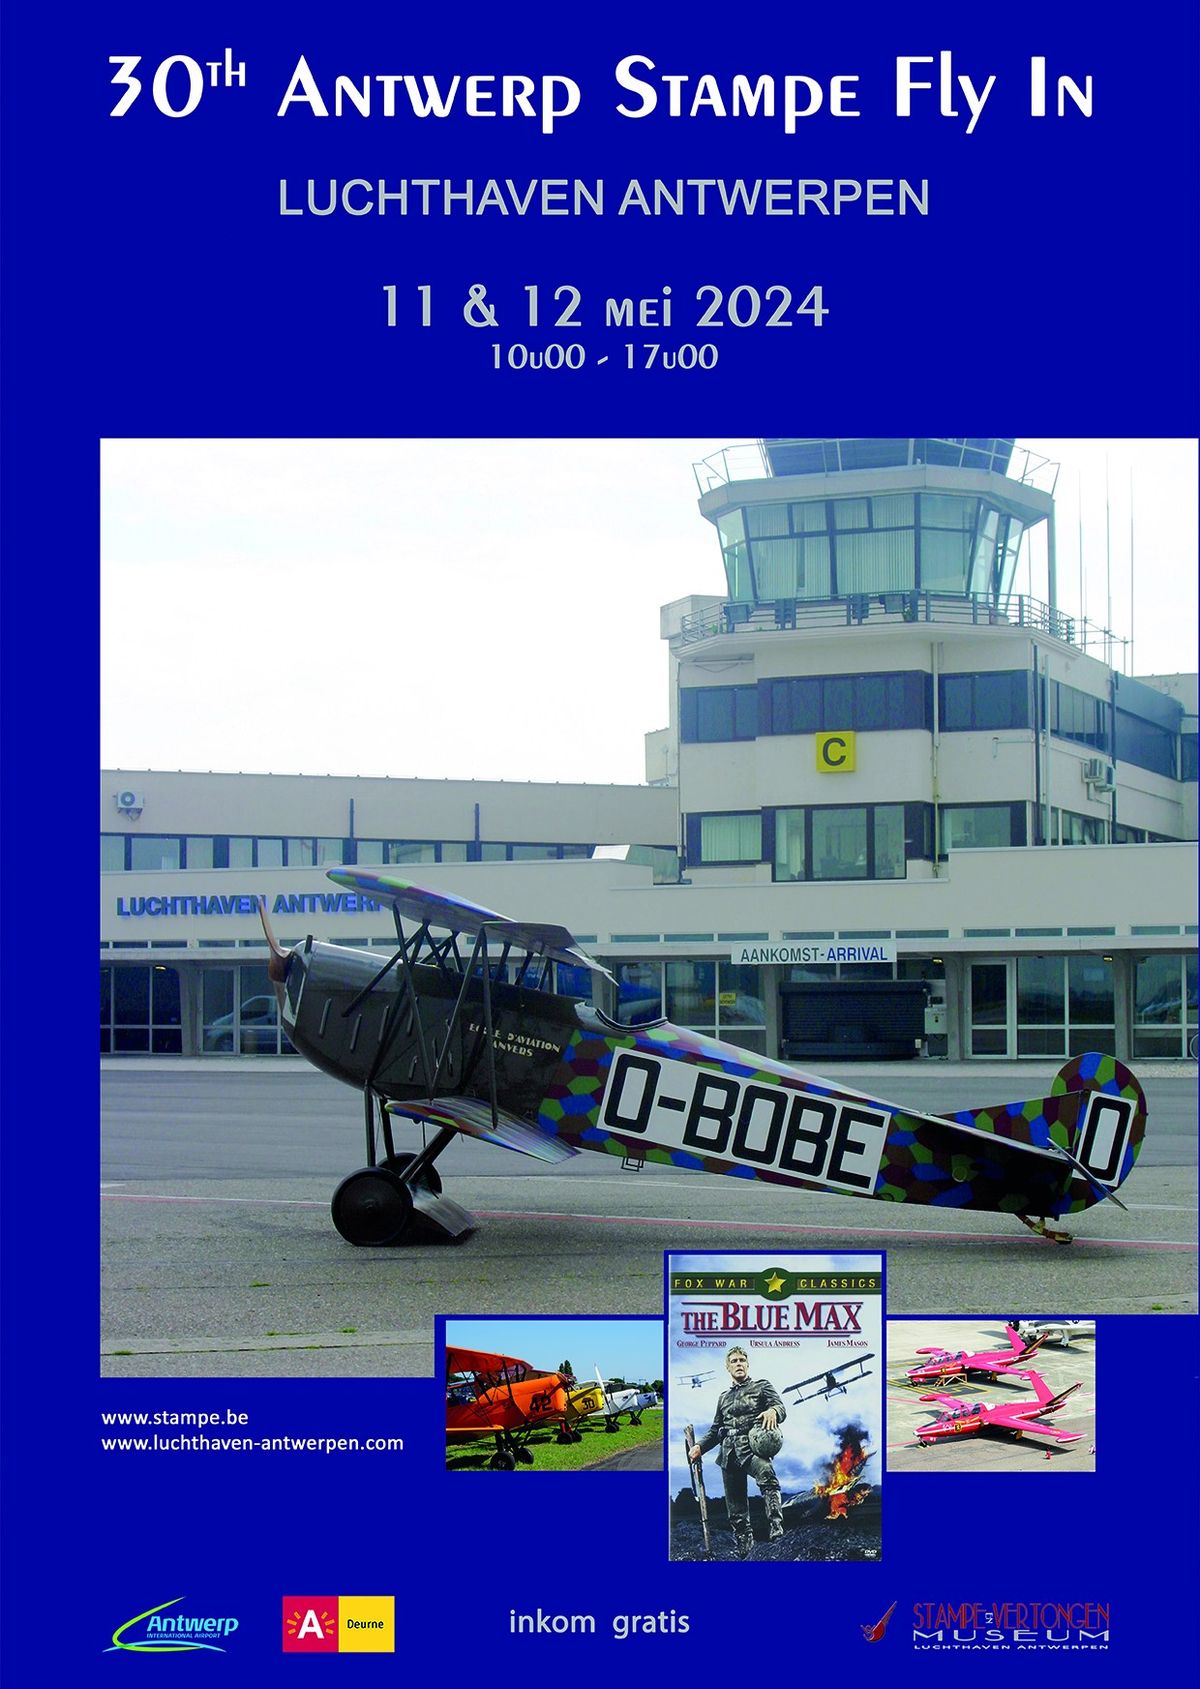 30th Antwerp Stampe Fly In